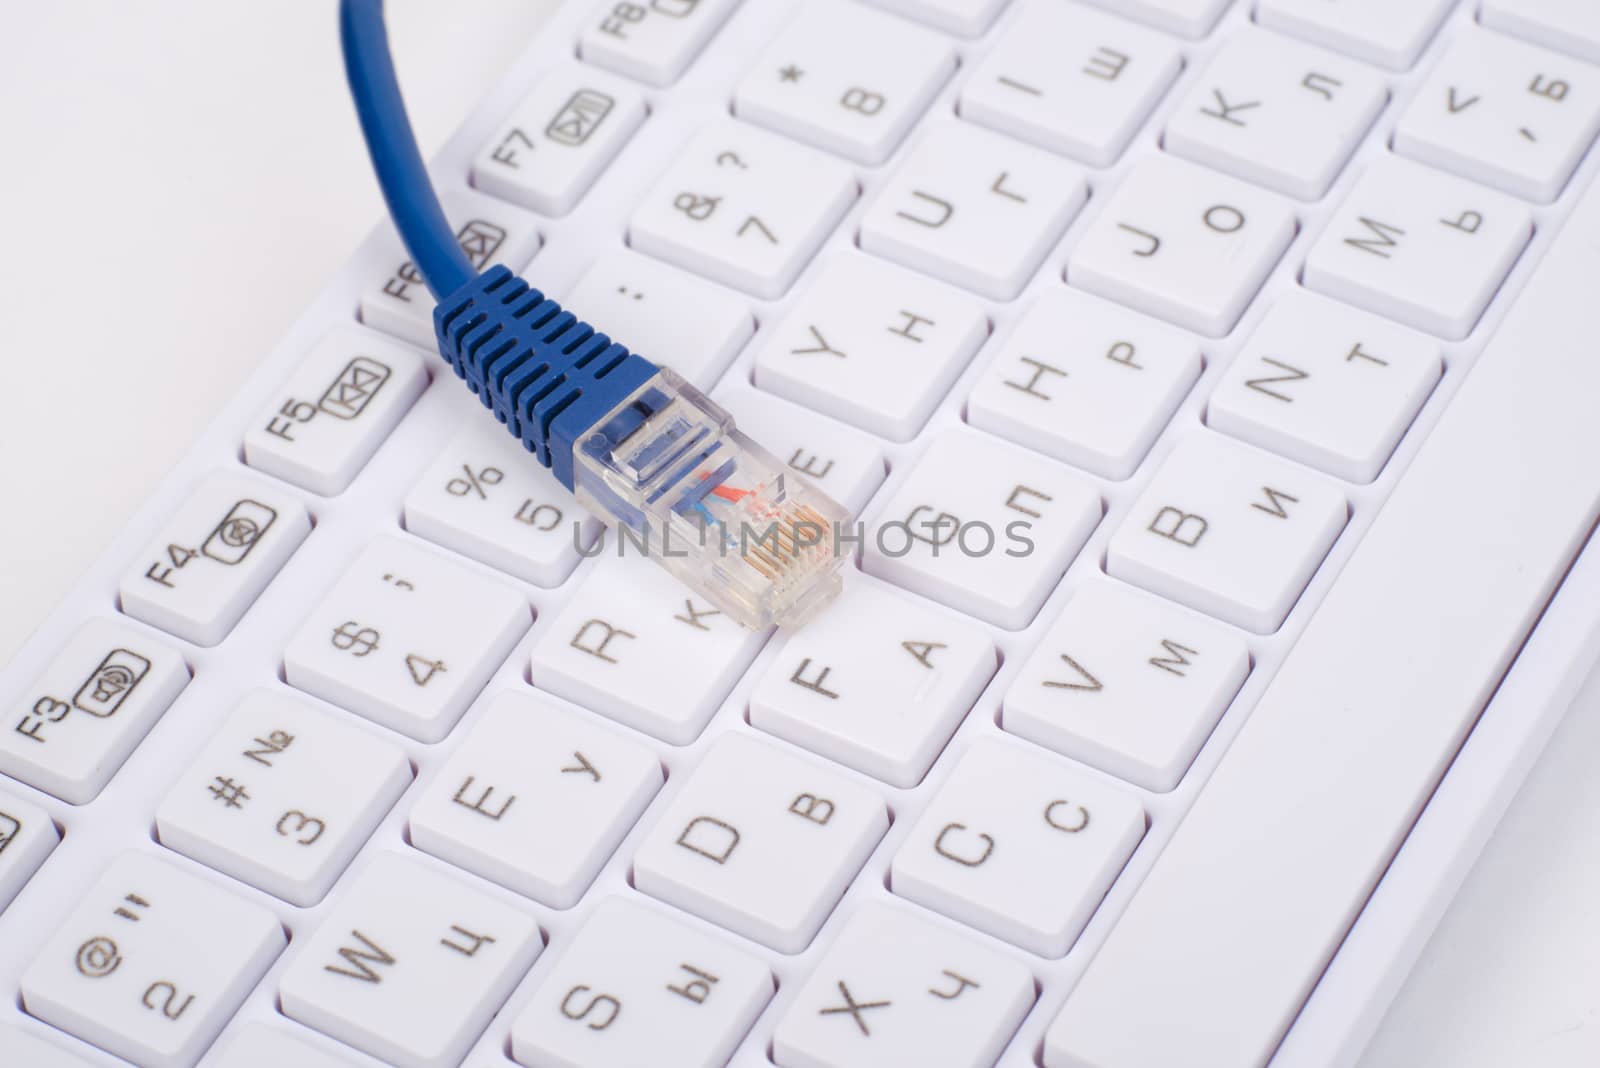 Computer keyboard with blue cable, close up view